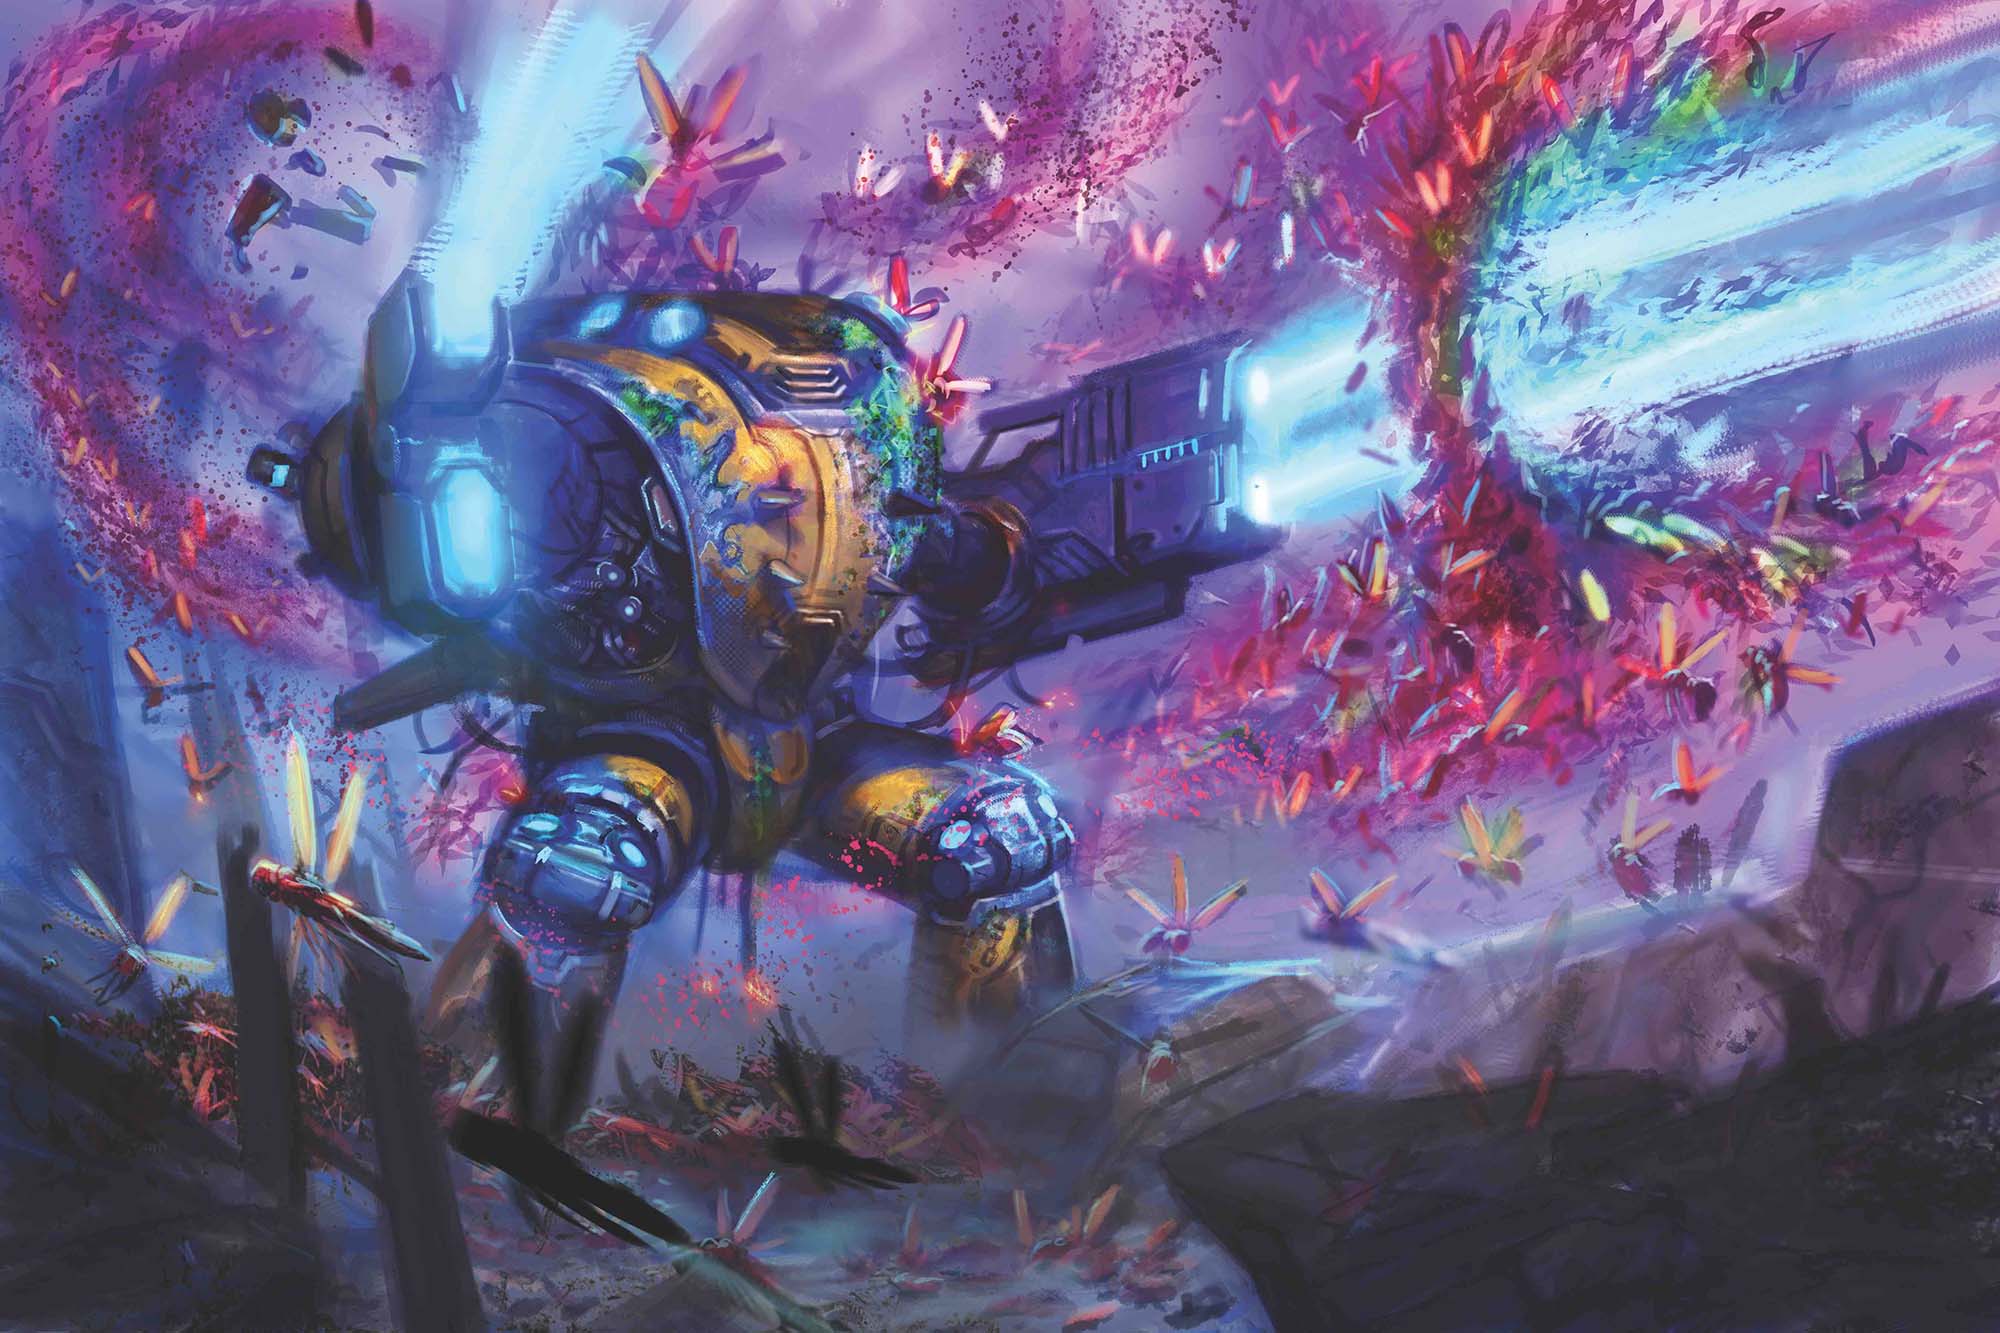  A swarm of iridescent insects engulf a huge metal mech, which is shooting bolts of plasma from two giant guns into the swarm